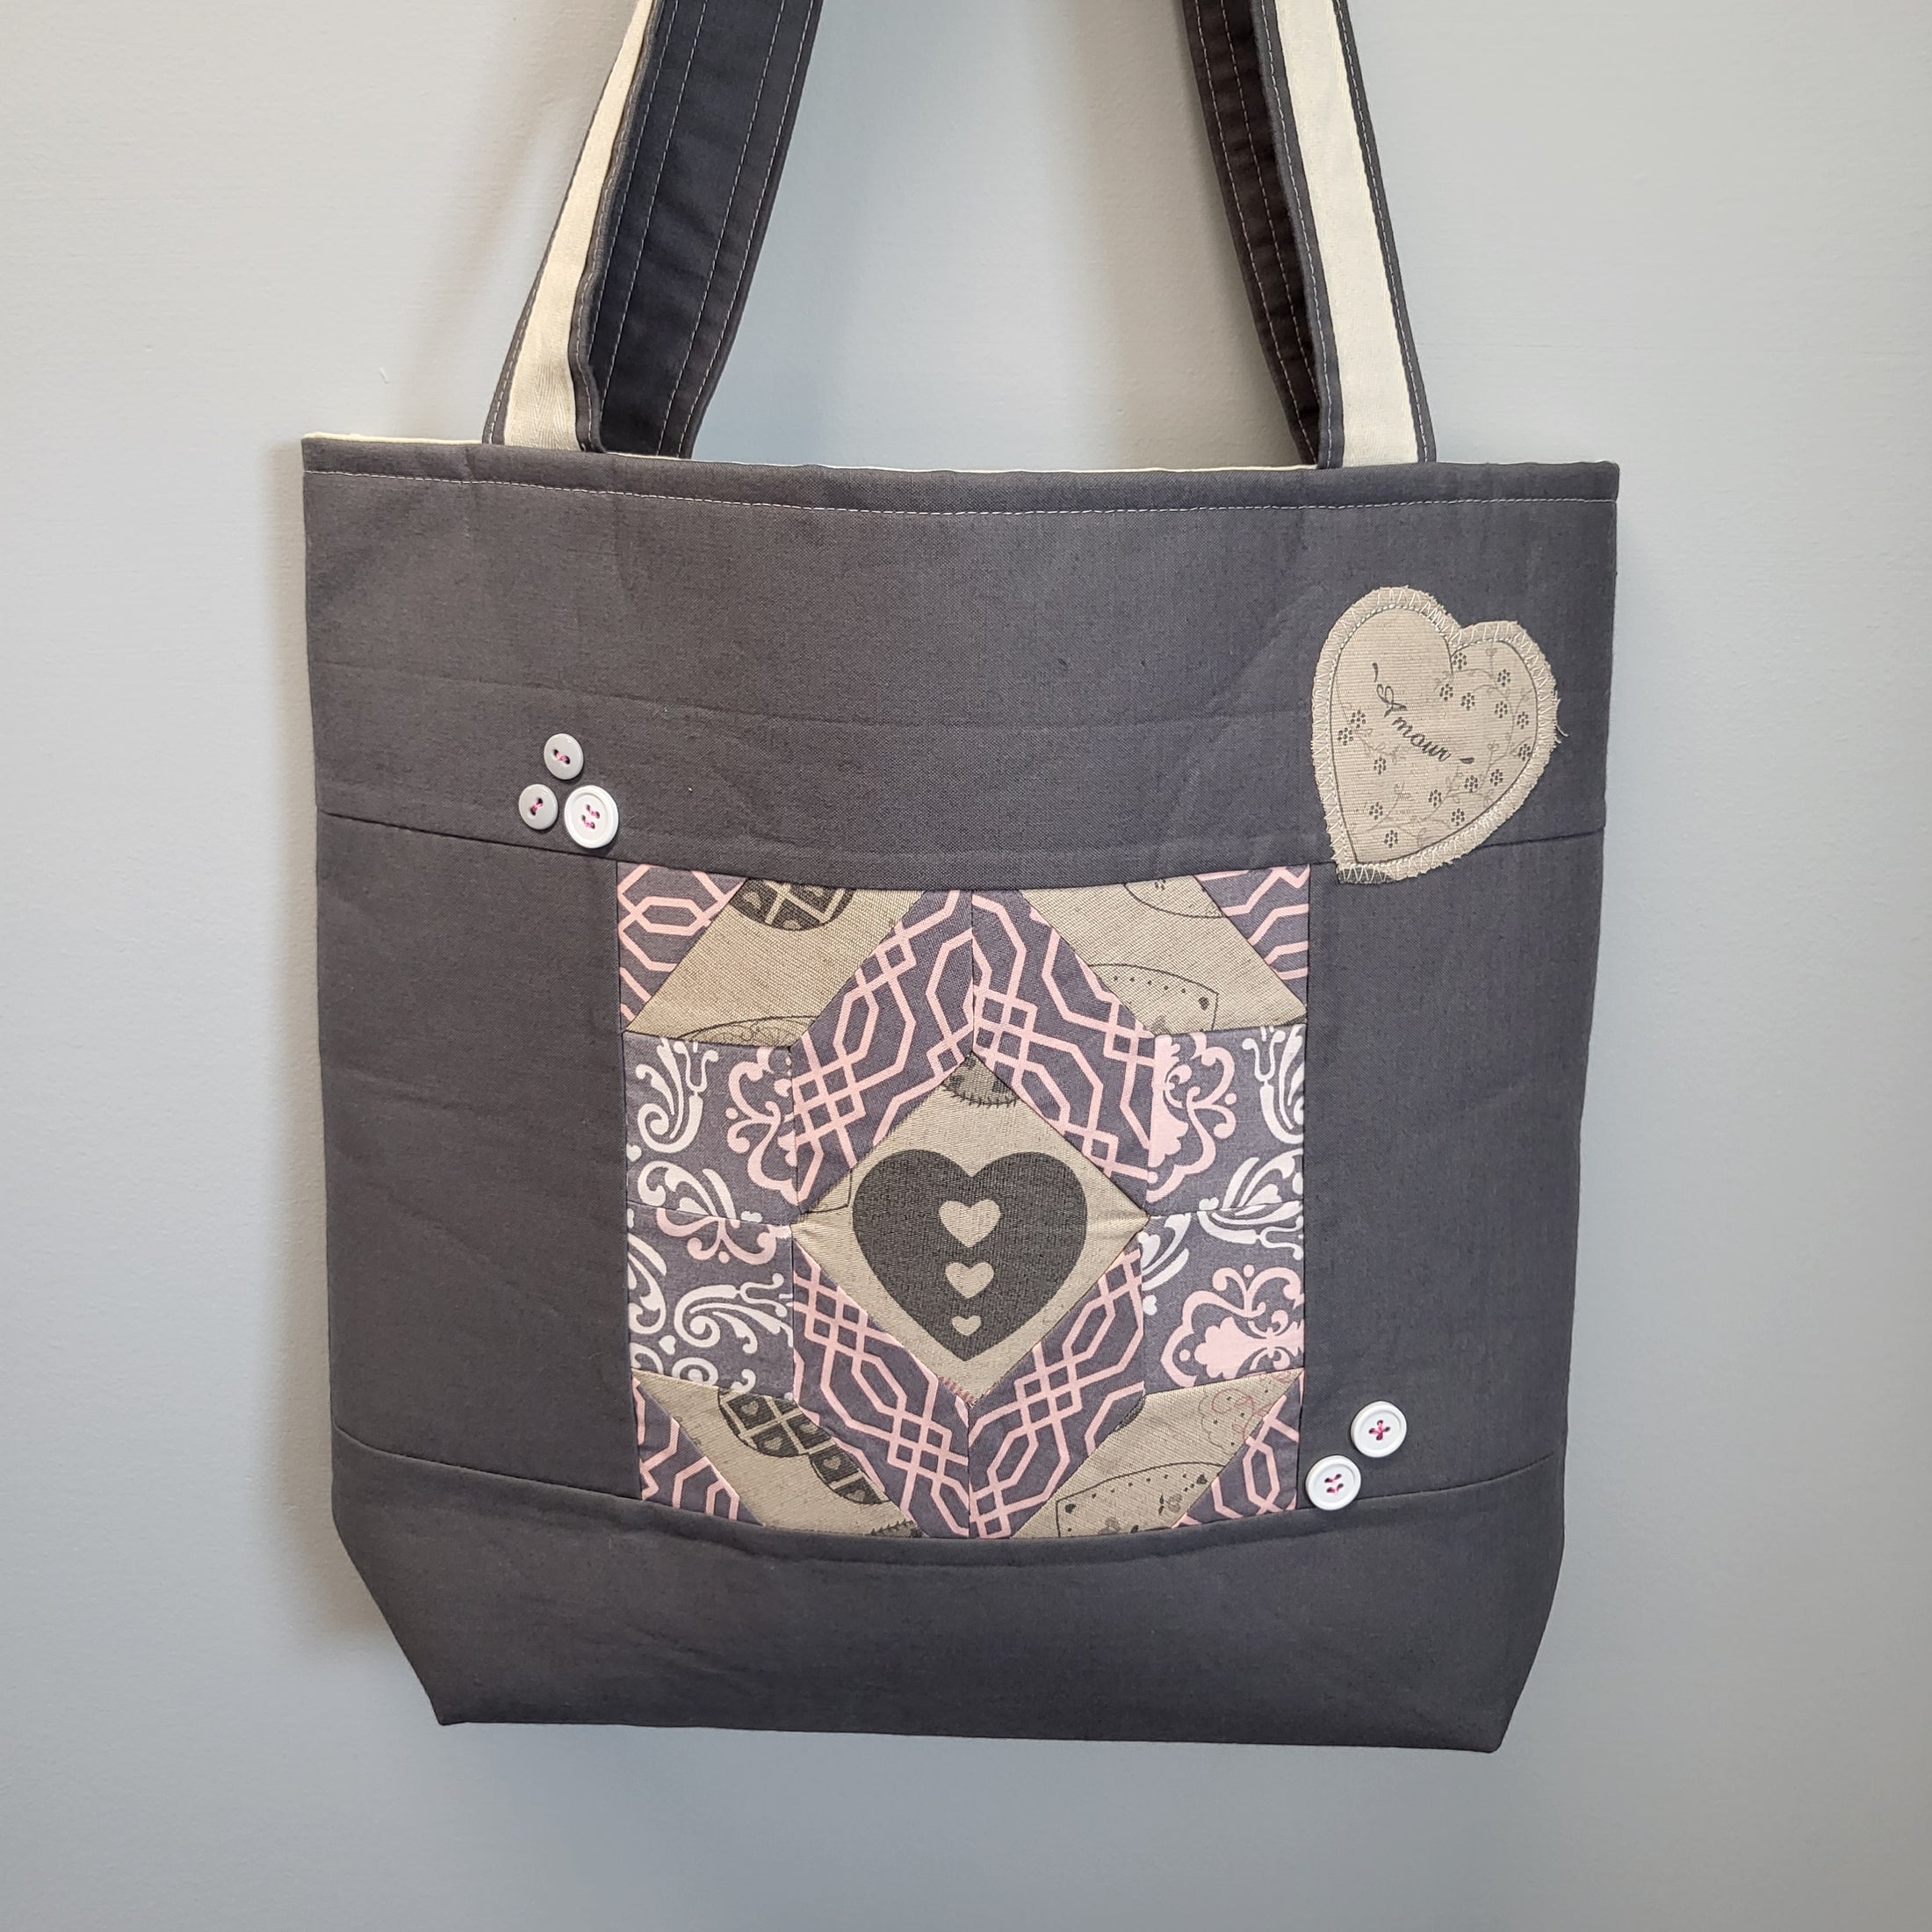 Quilted heart tote with heart appliques and handsewn buttons.